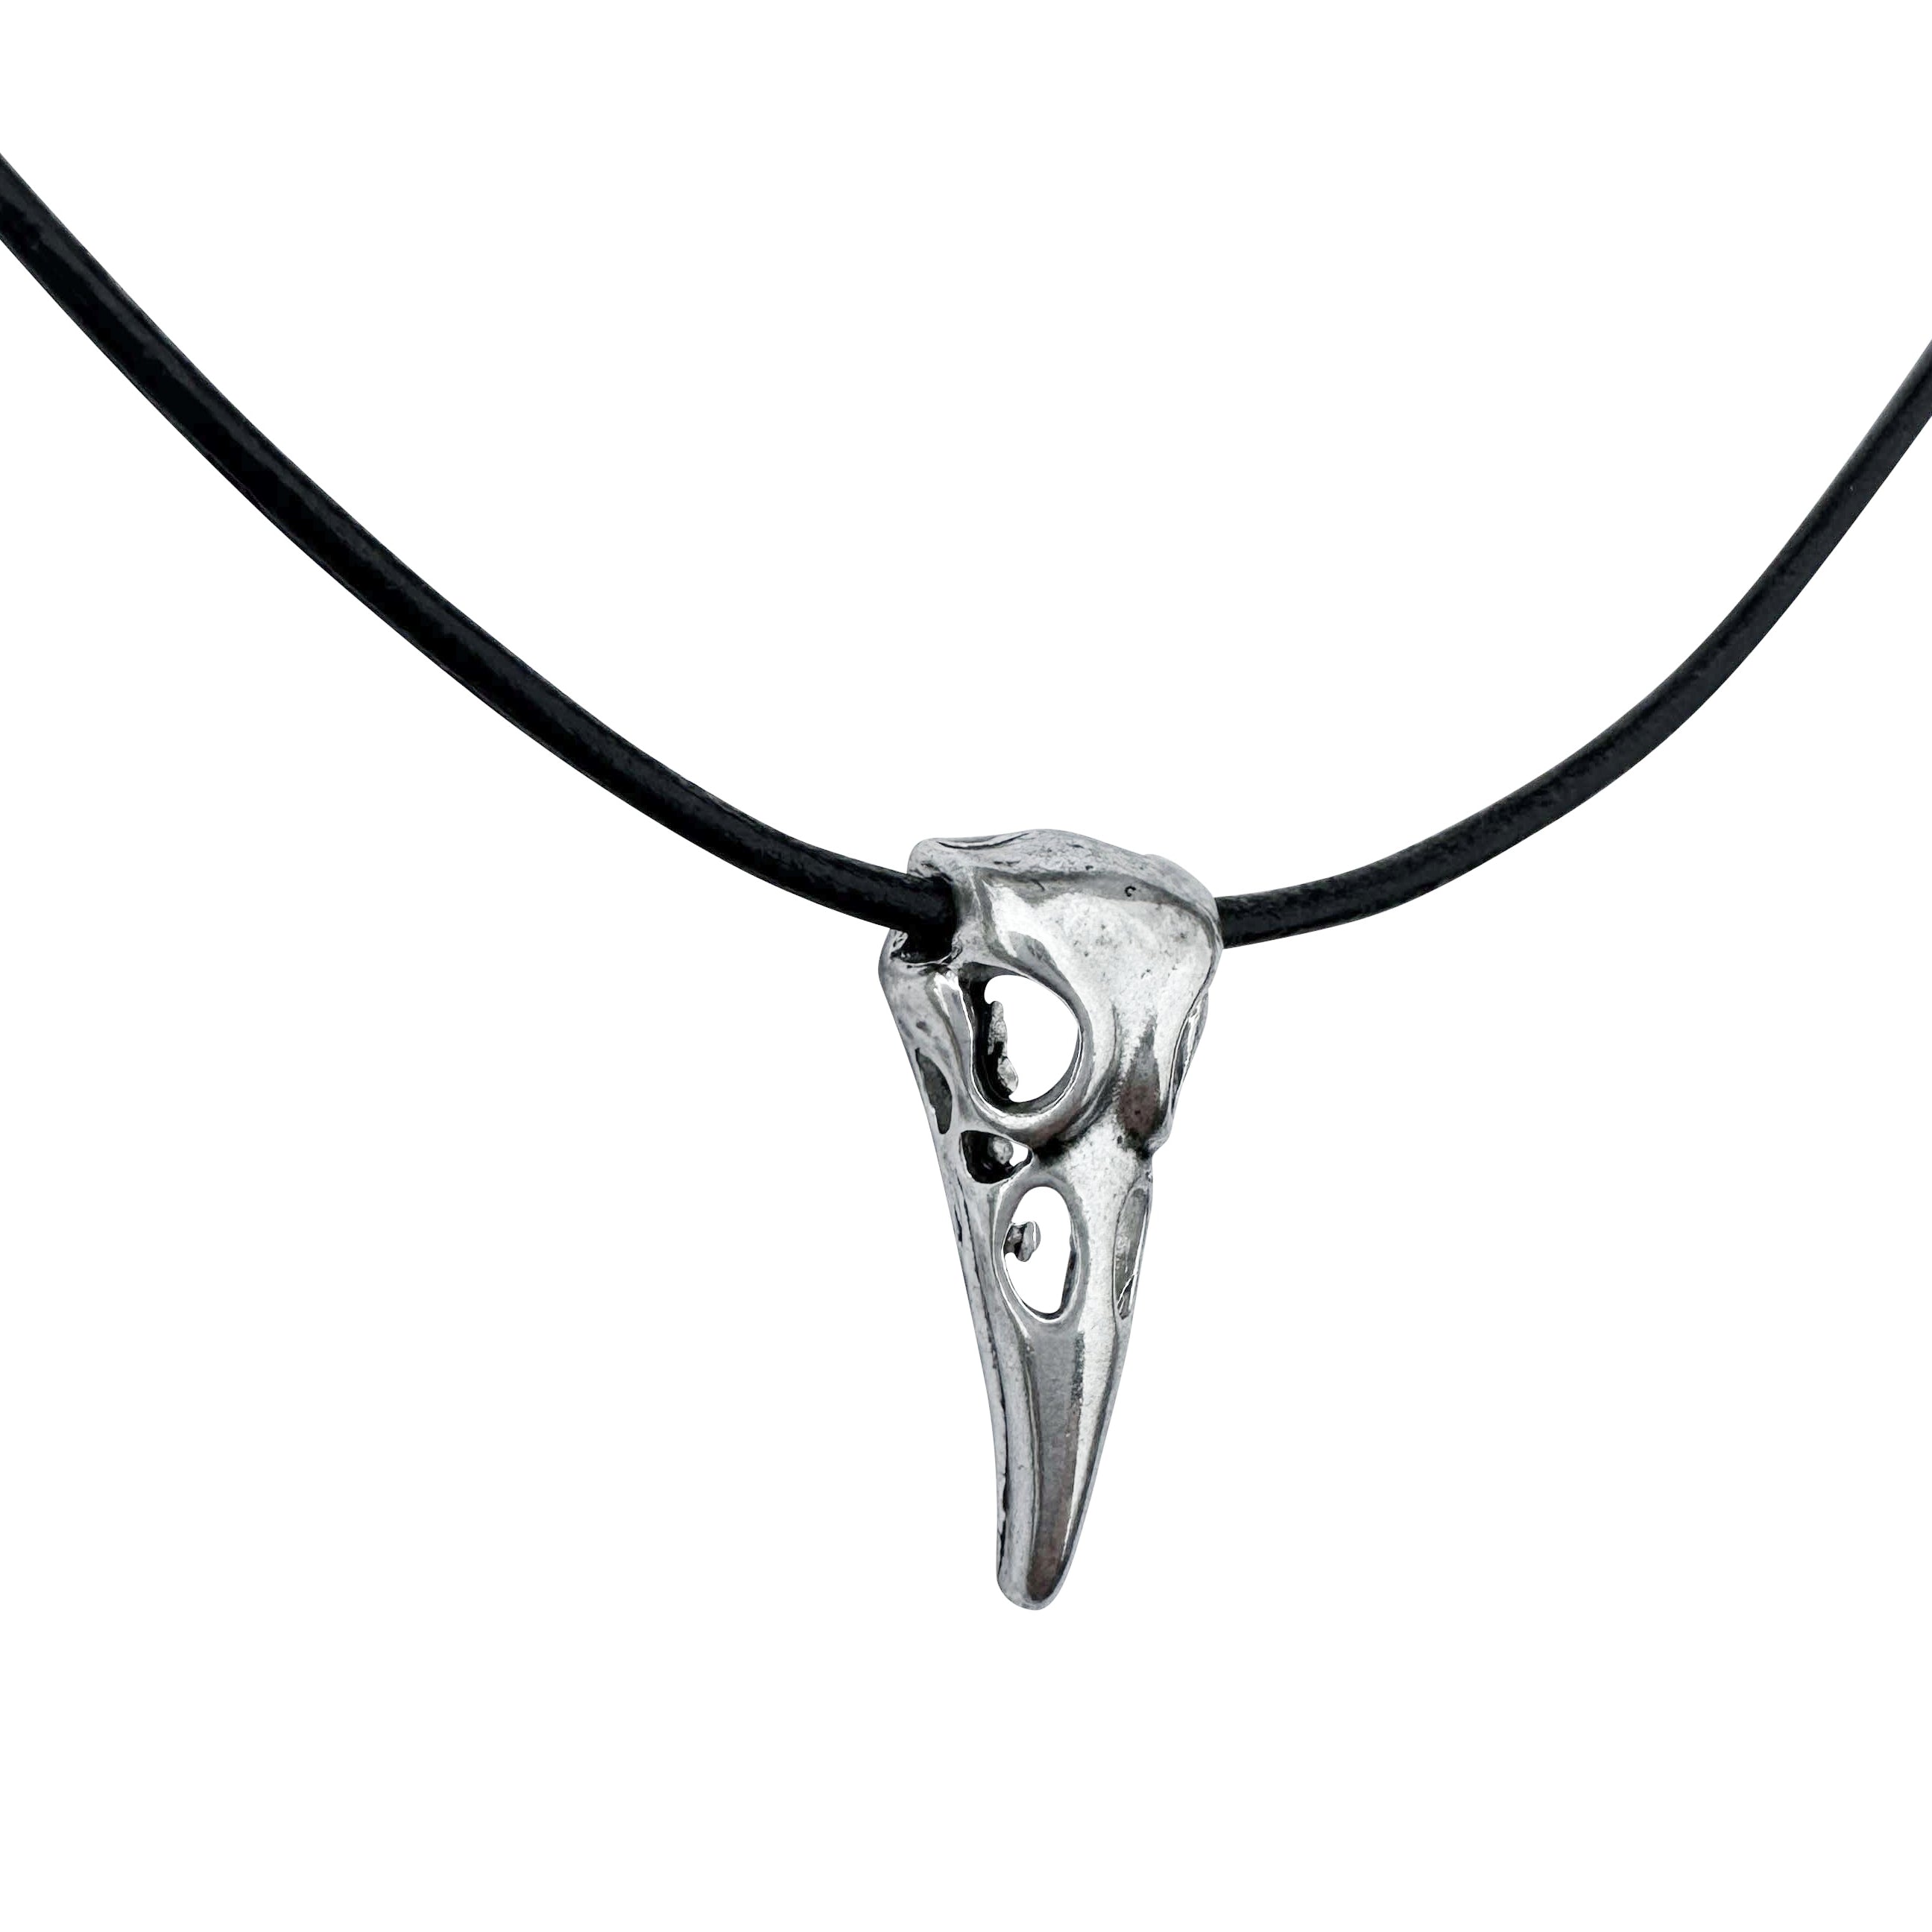 Silver Raven Skull on Fine Black Leather Necklace Cord - 18"